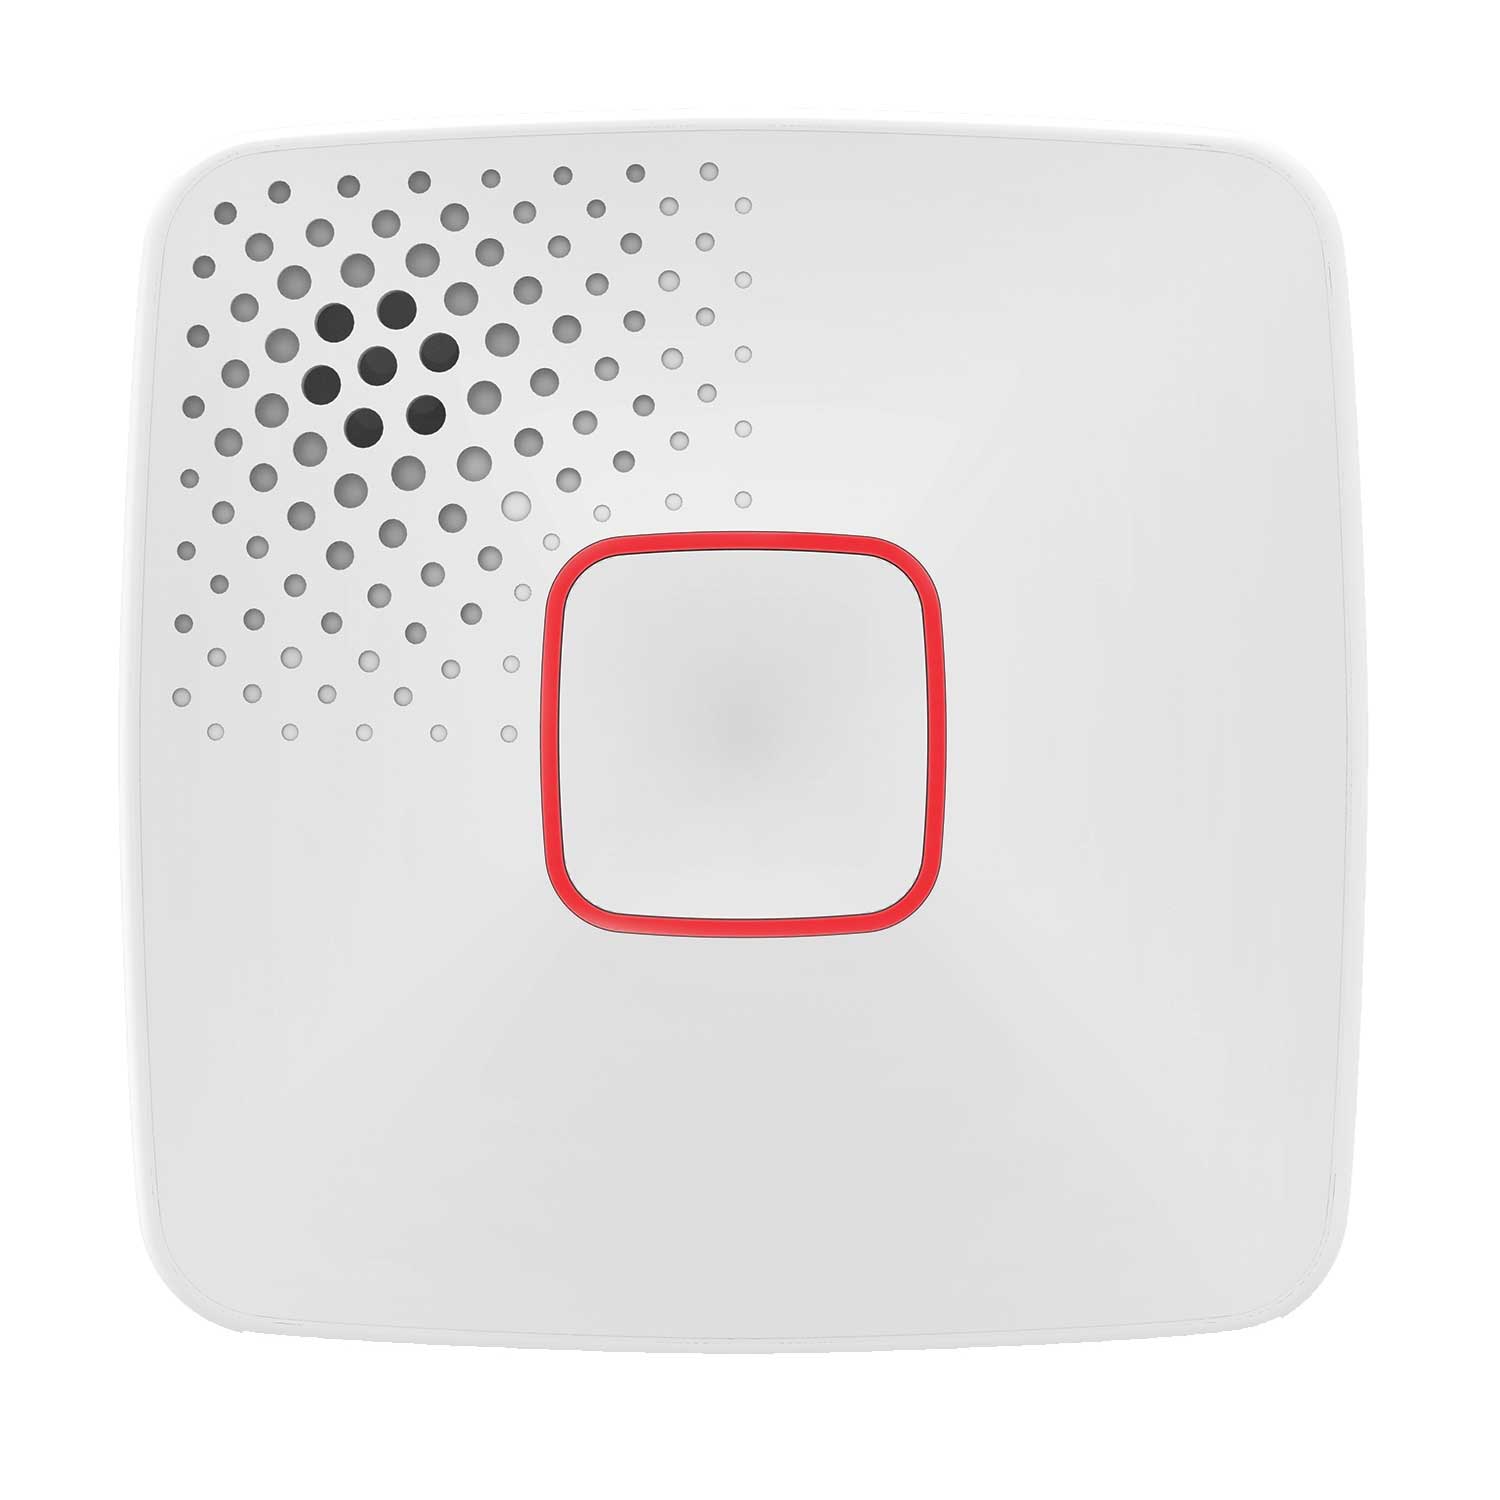 First Alert Onelink Wi-Fi Smoke & Carbon Monoxide Alarm with 10-Year Sealed Battery, HomeKit-enabled - DC10-500